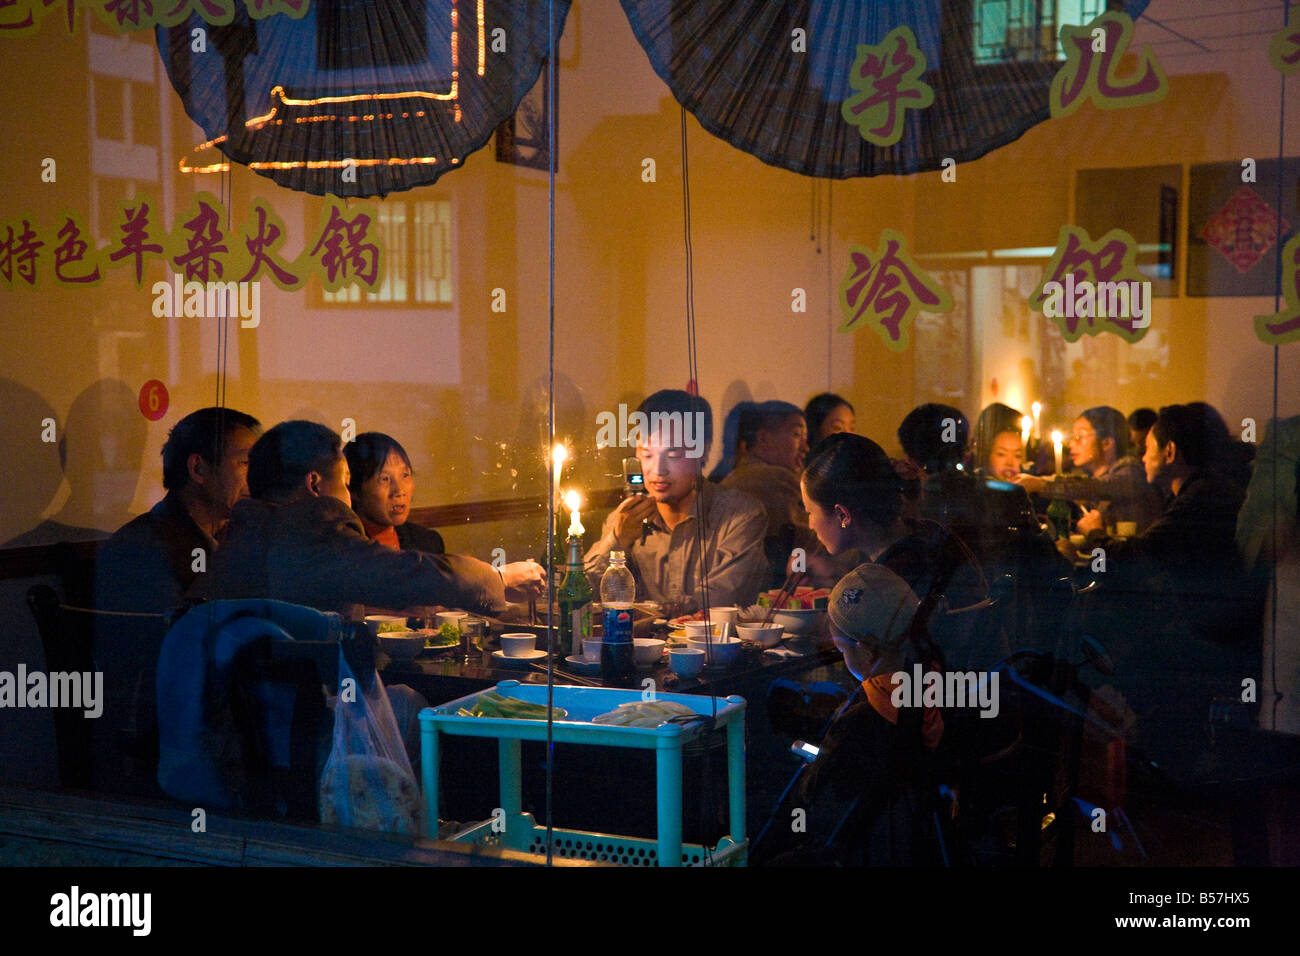 Eating by candlelight in a restaurant in Songpan near Huanglong and JiuzHaiGou northern Sichuan China during power cut JMH3461 Stock Photo